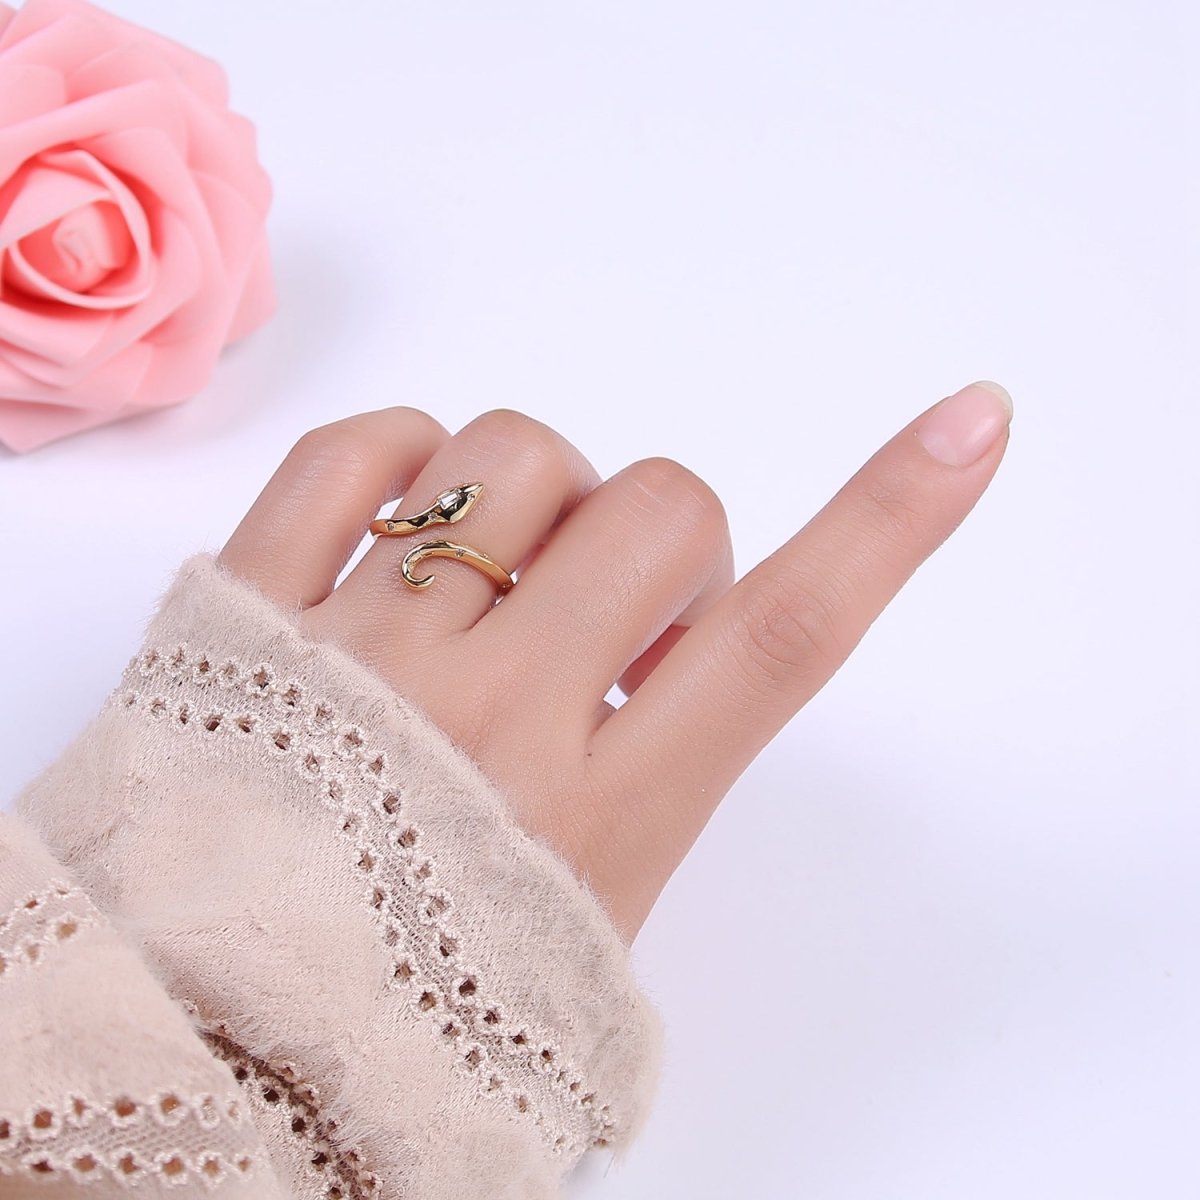 24K Gold Filled Serpent Ring, Adjustable Micro Pave Zirconia CZ Snake Ring, Dainty Curling Snake Jewelry U-464 - DLUXCA